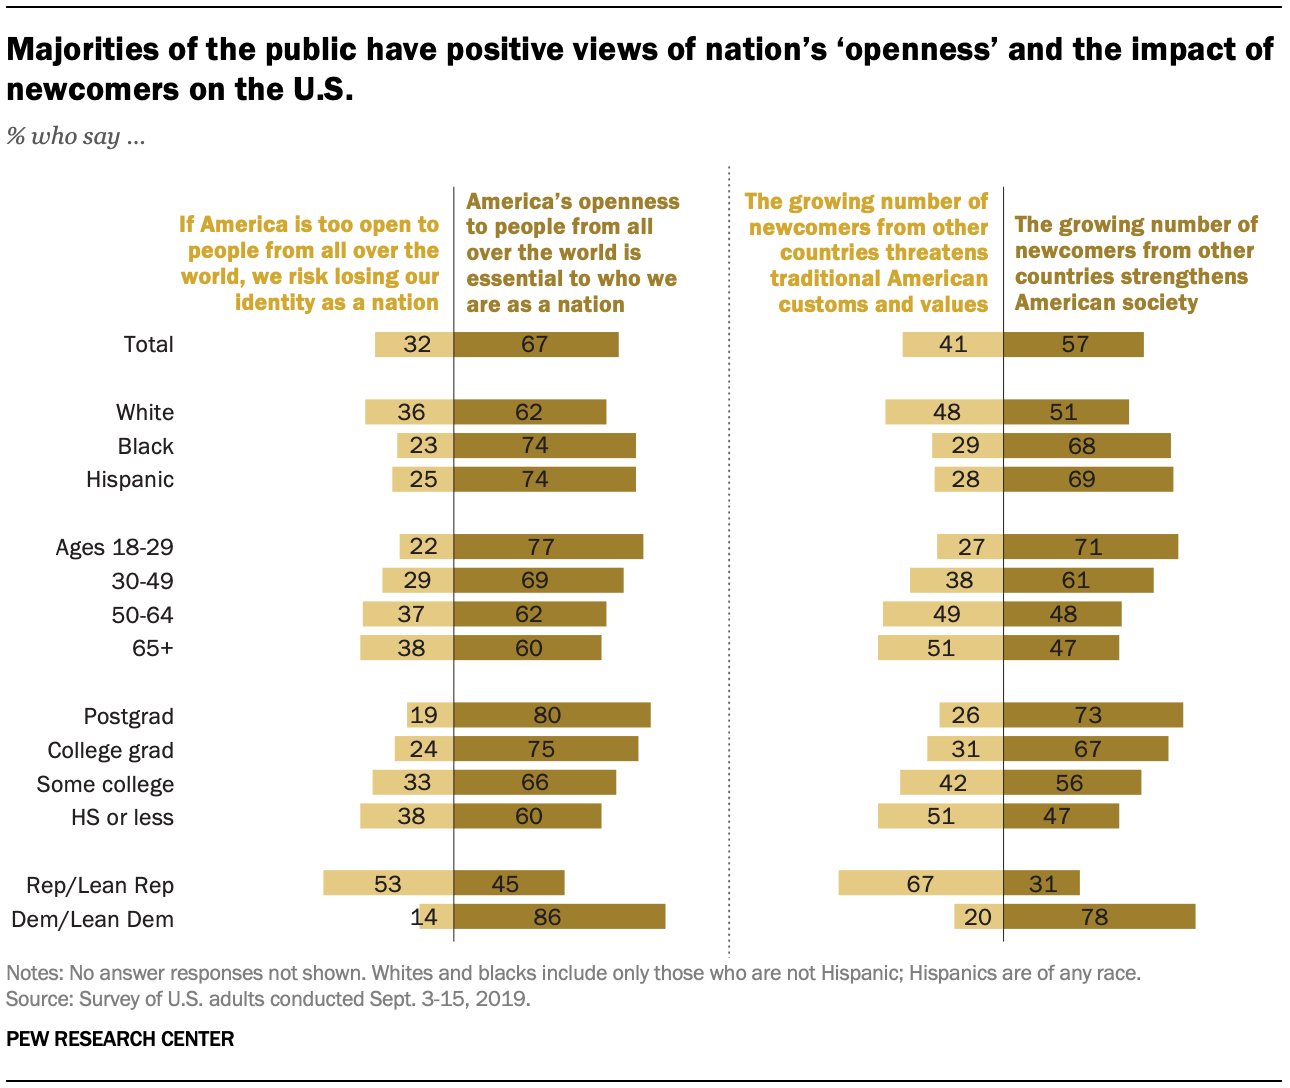 Majorities of the public have positive views of nation’s ‘openness’ and the impact of newcomers on the U.S.